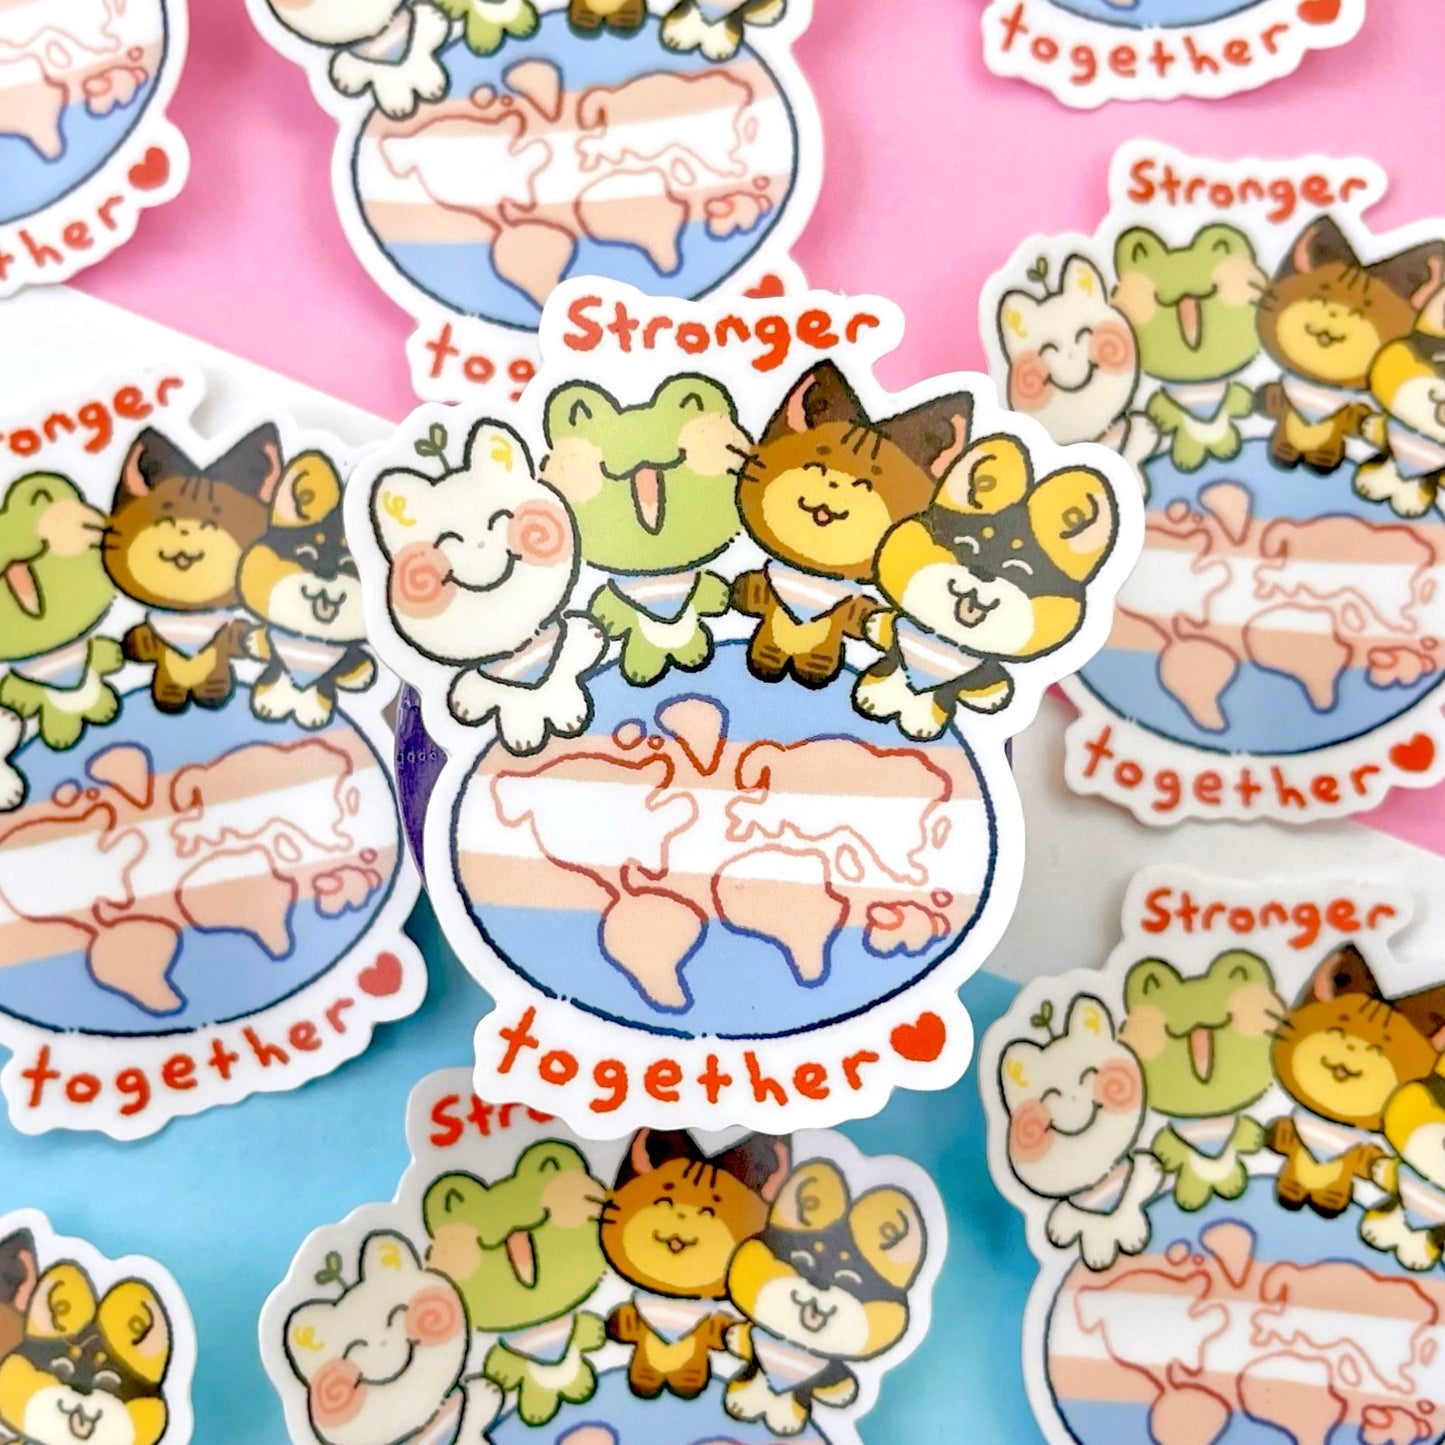 Together We Are Stronger Charity Sticker